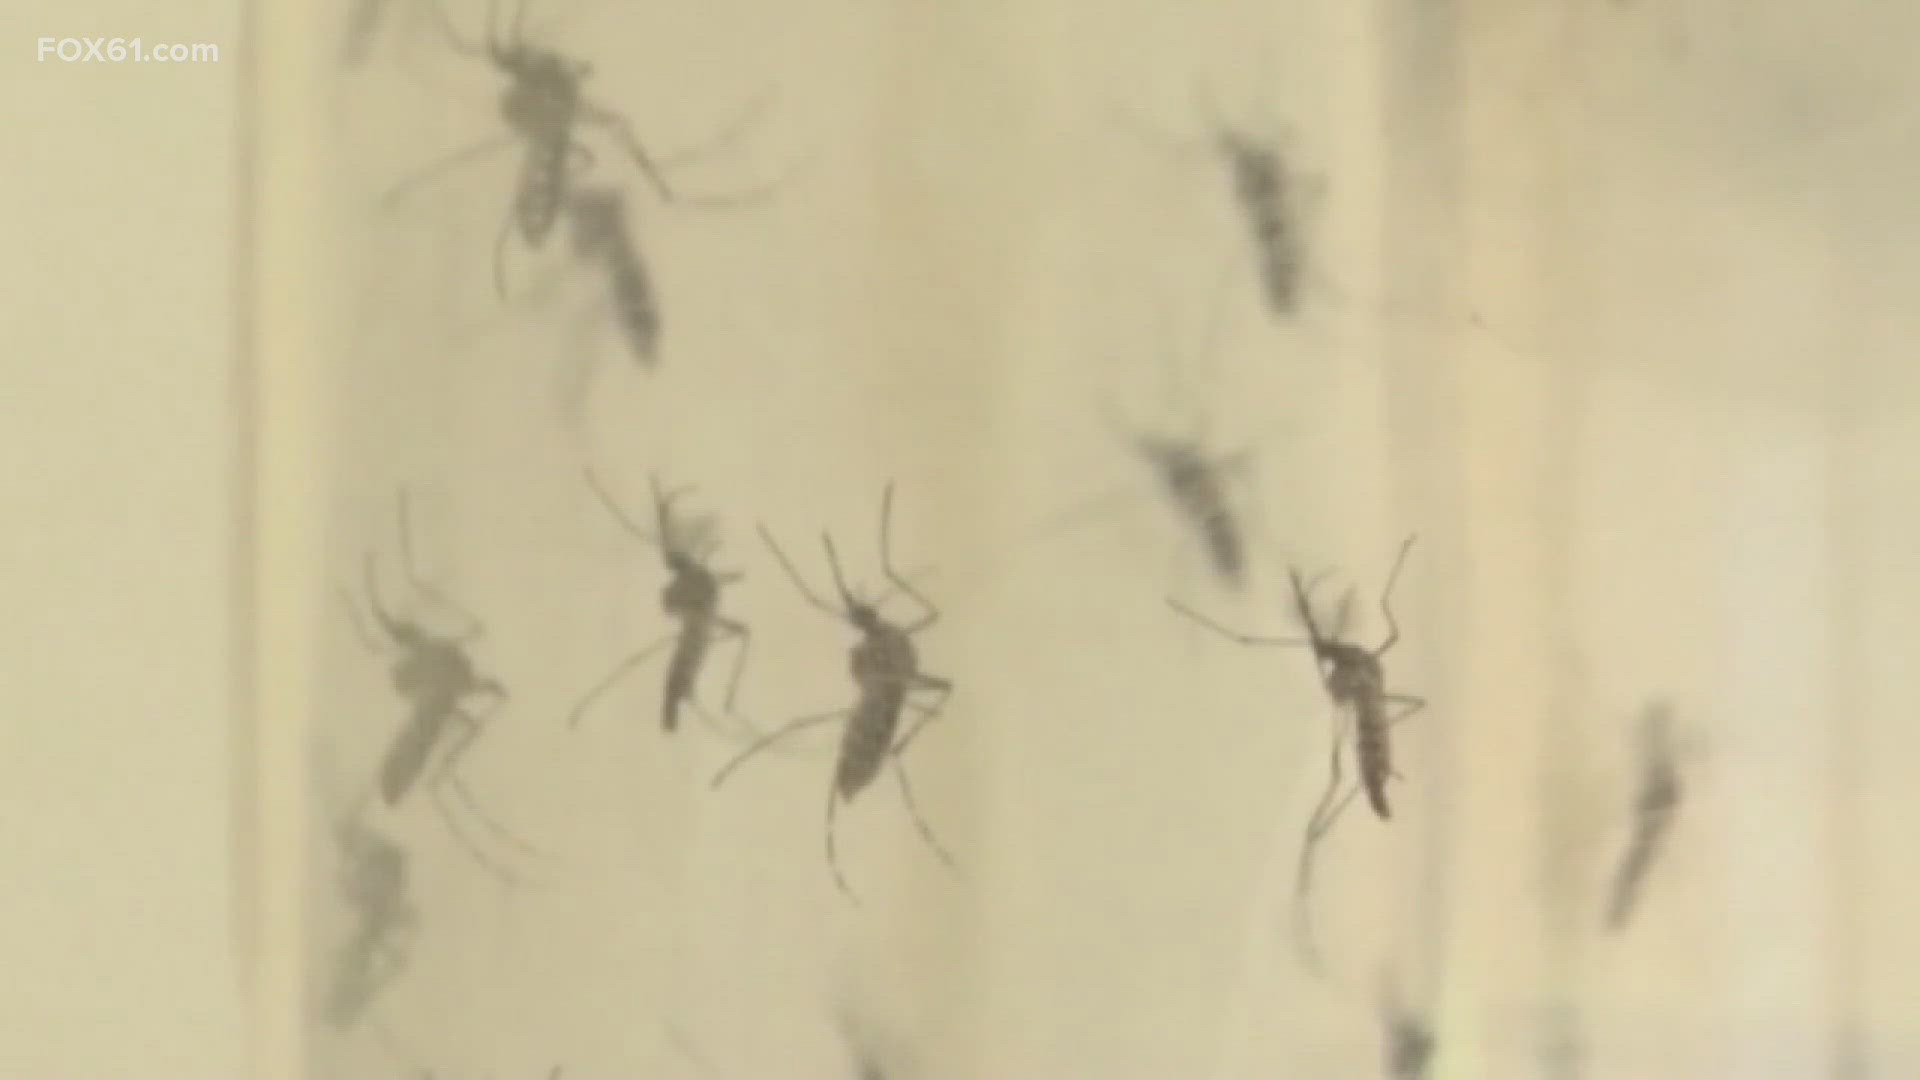 Scientists at CAES said that increased rain and warm weather have boosted mosquito activity this season.